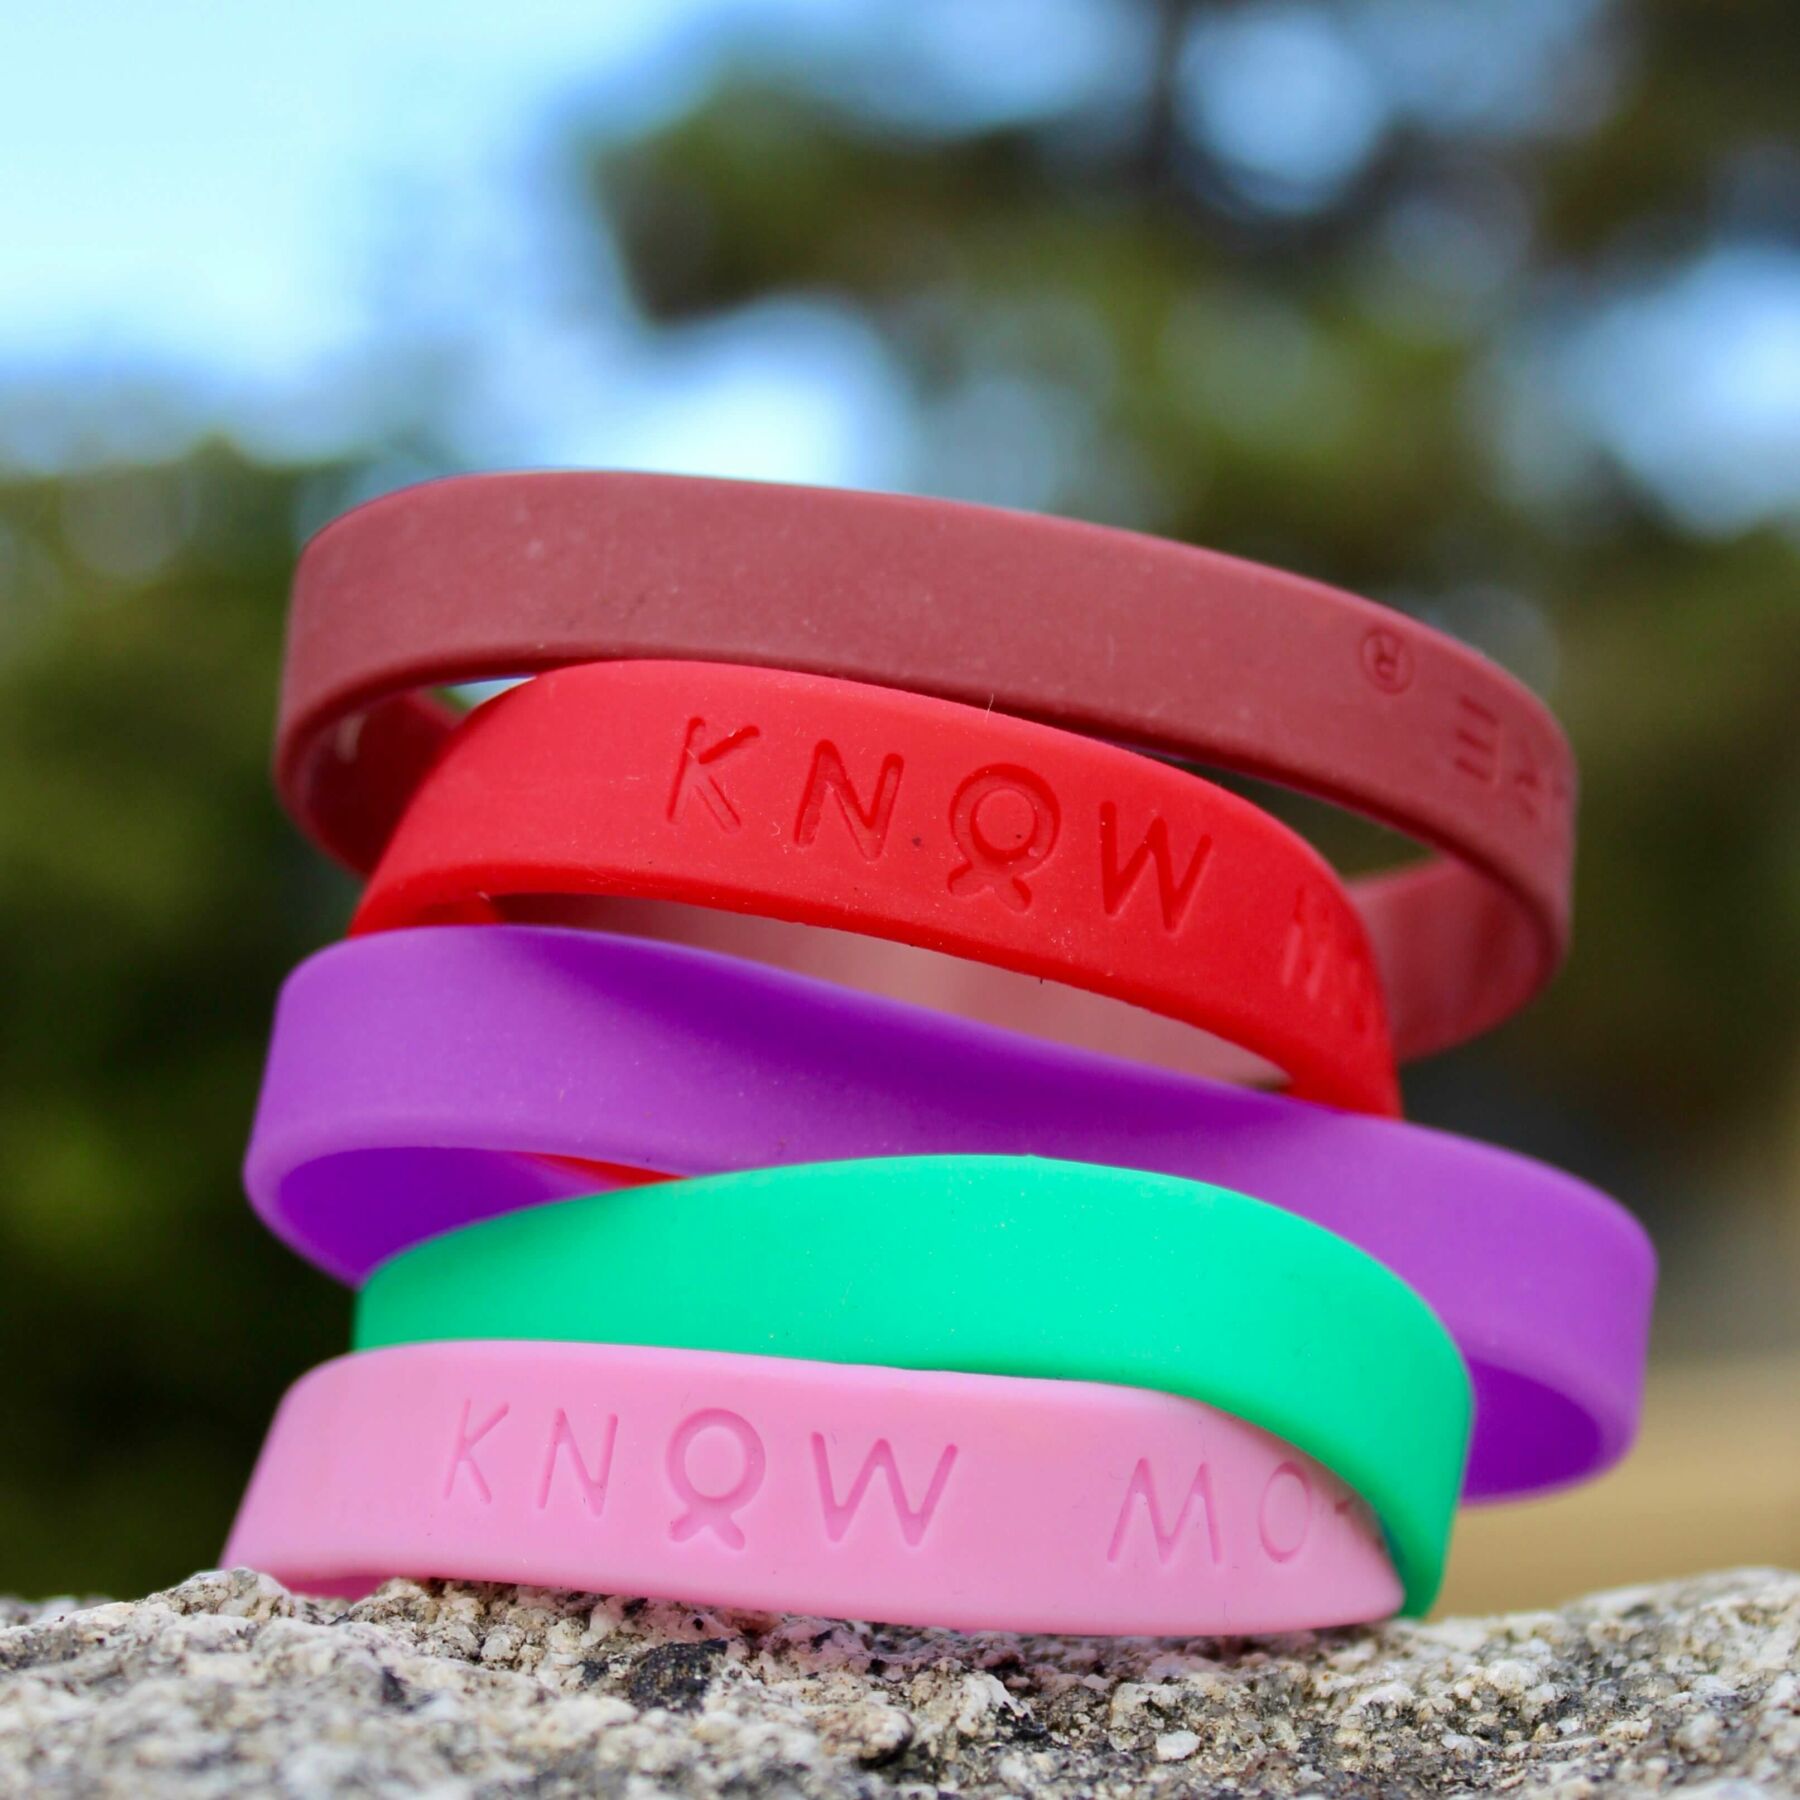 The Different Meanings Behind Coloured Wristbands - The Wristband Co.